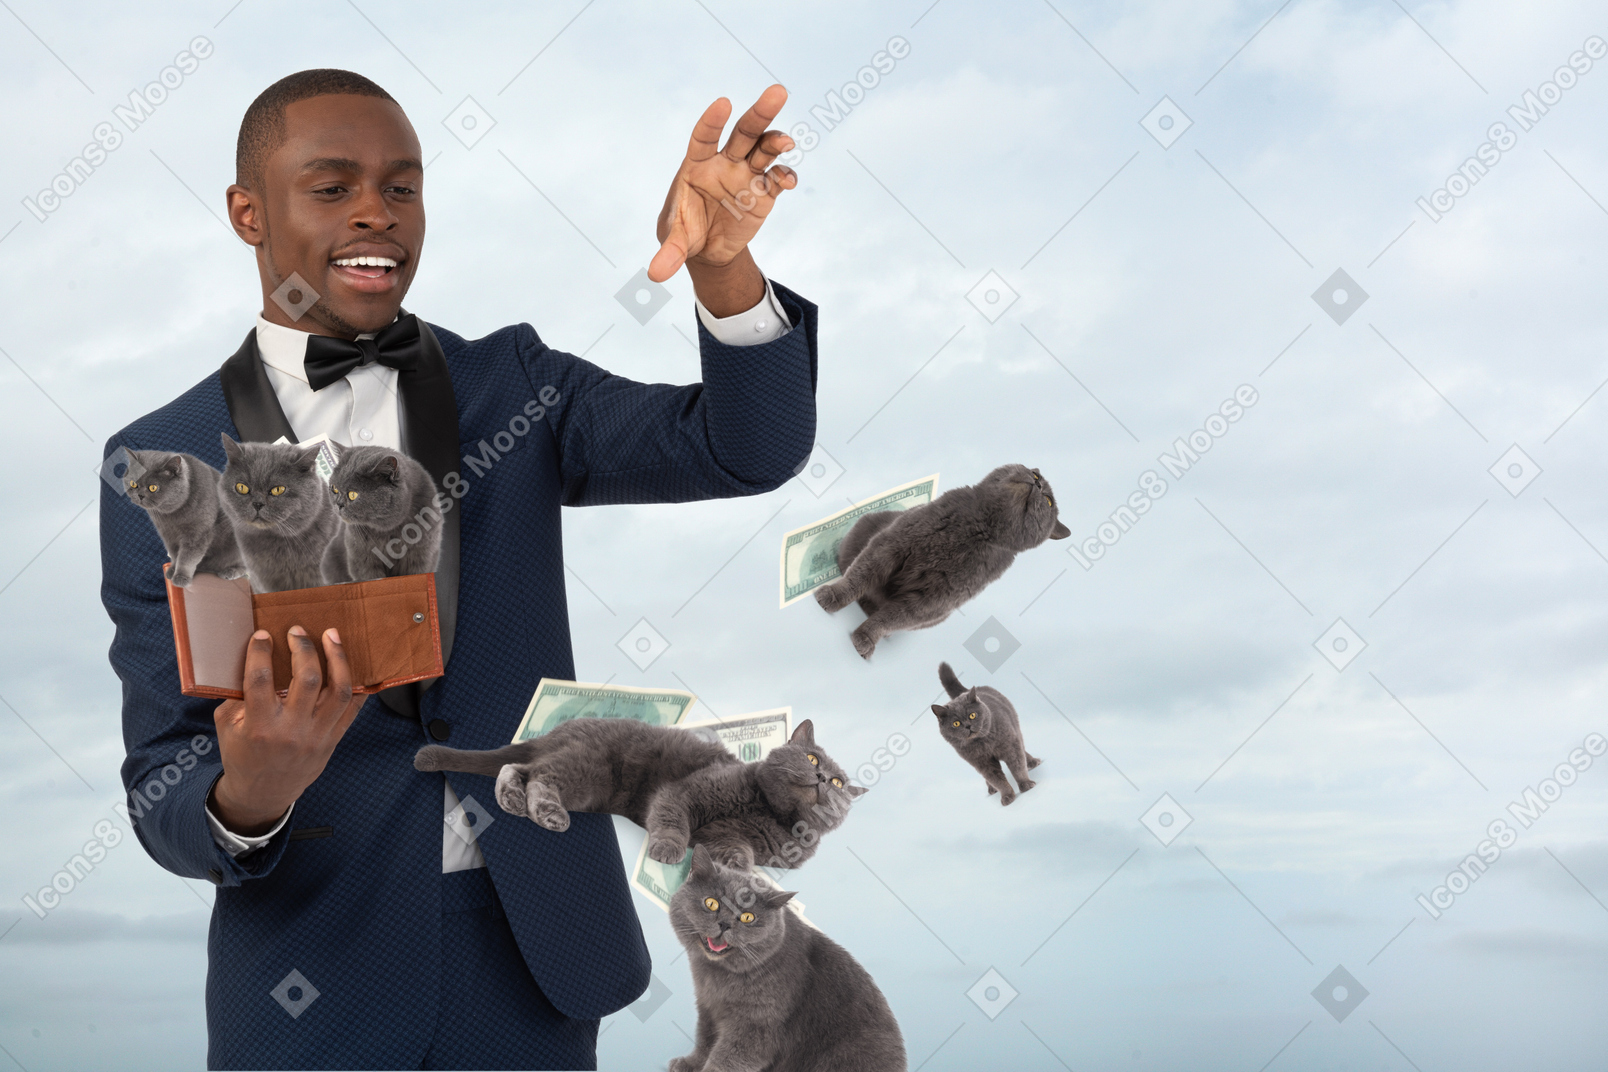 A man in a tuxedo juggling cats and money